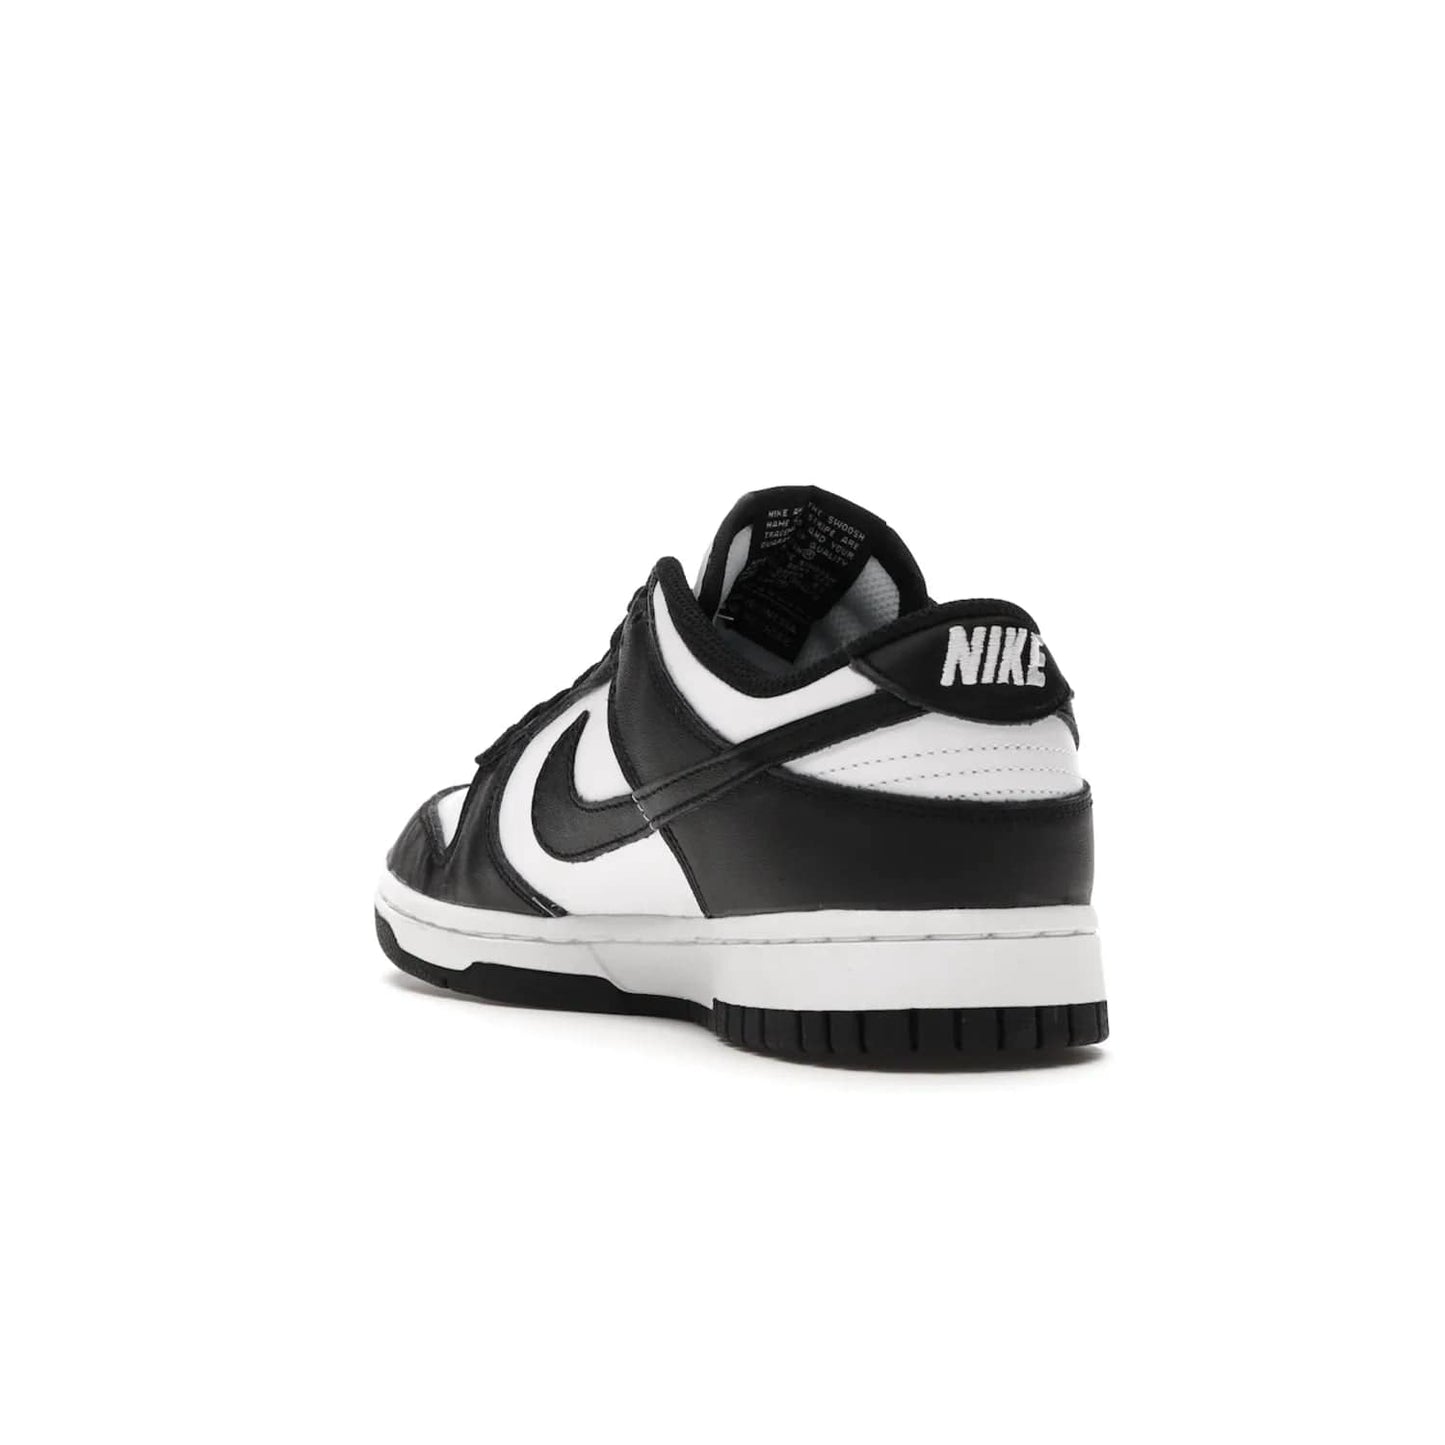 Nike Dunk Low Retro White Black Panda (2021) (Women's) - Image 25 - Only at www.BallersClubKickz.com - Say hello to the new Nike Dunk Low Retro White Black Panda (2021) (Women's)! White & black leather upper with Nike Swoosh logo. Get your pair for $100 in March 2021! Shop now!